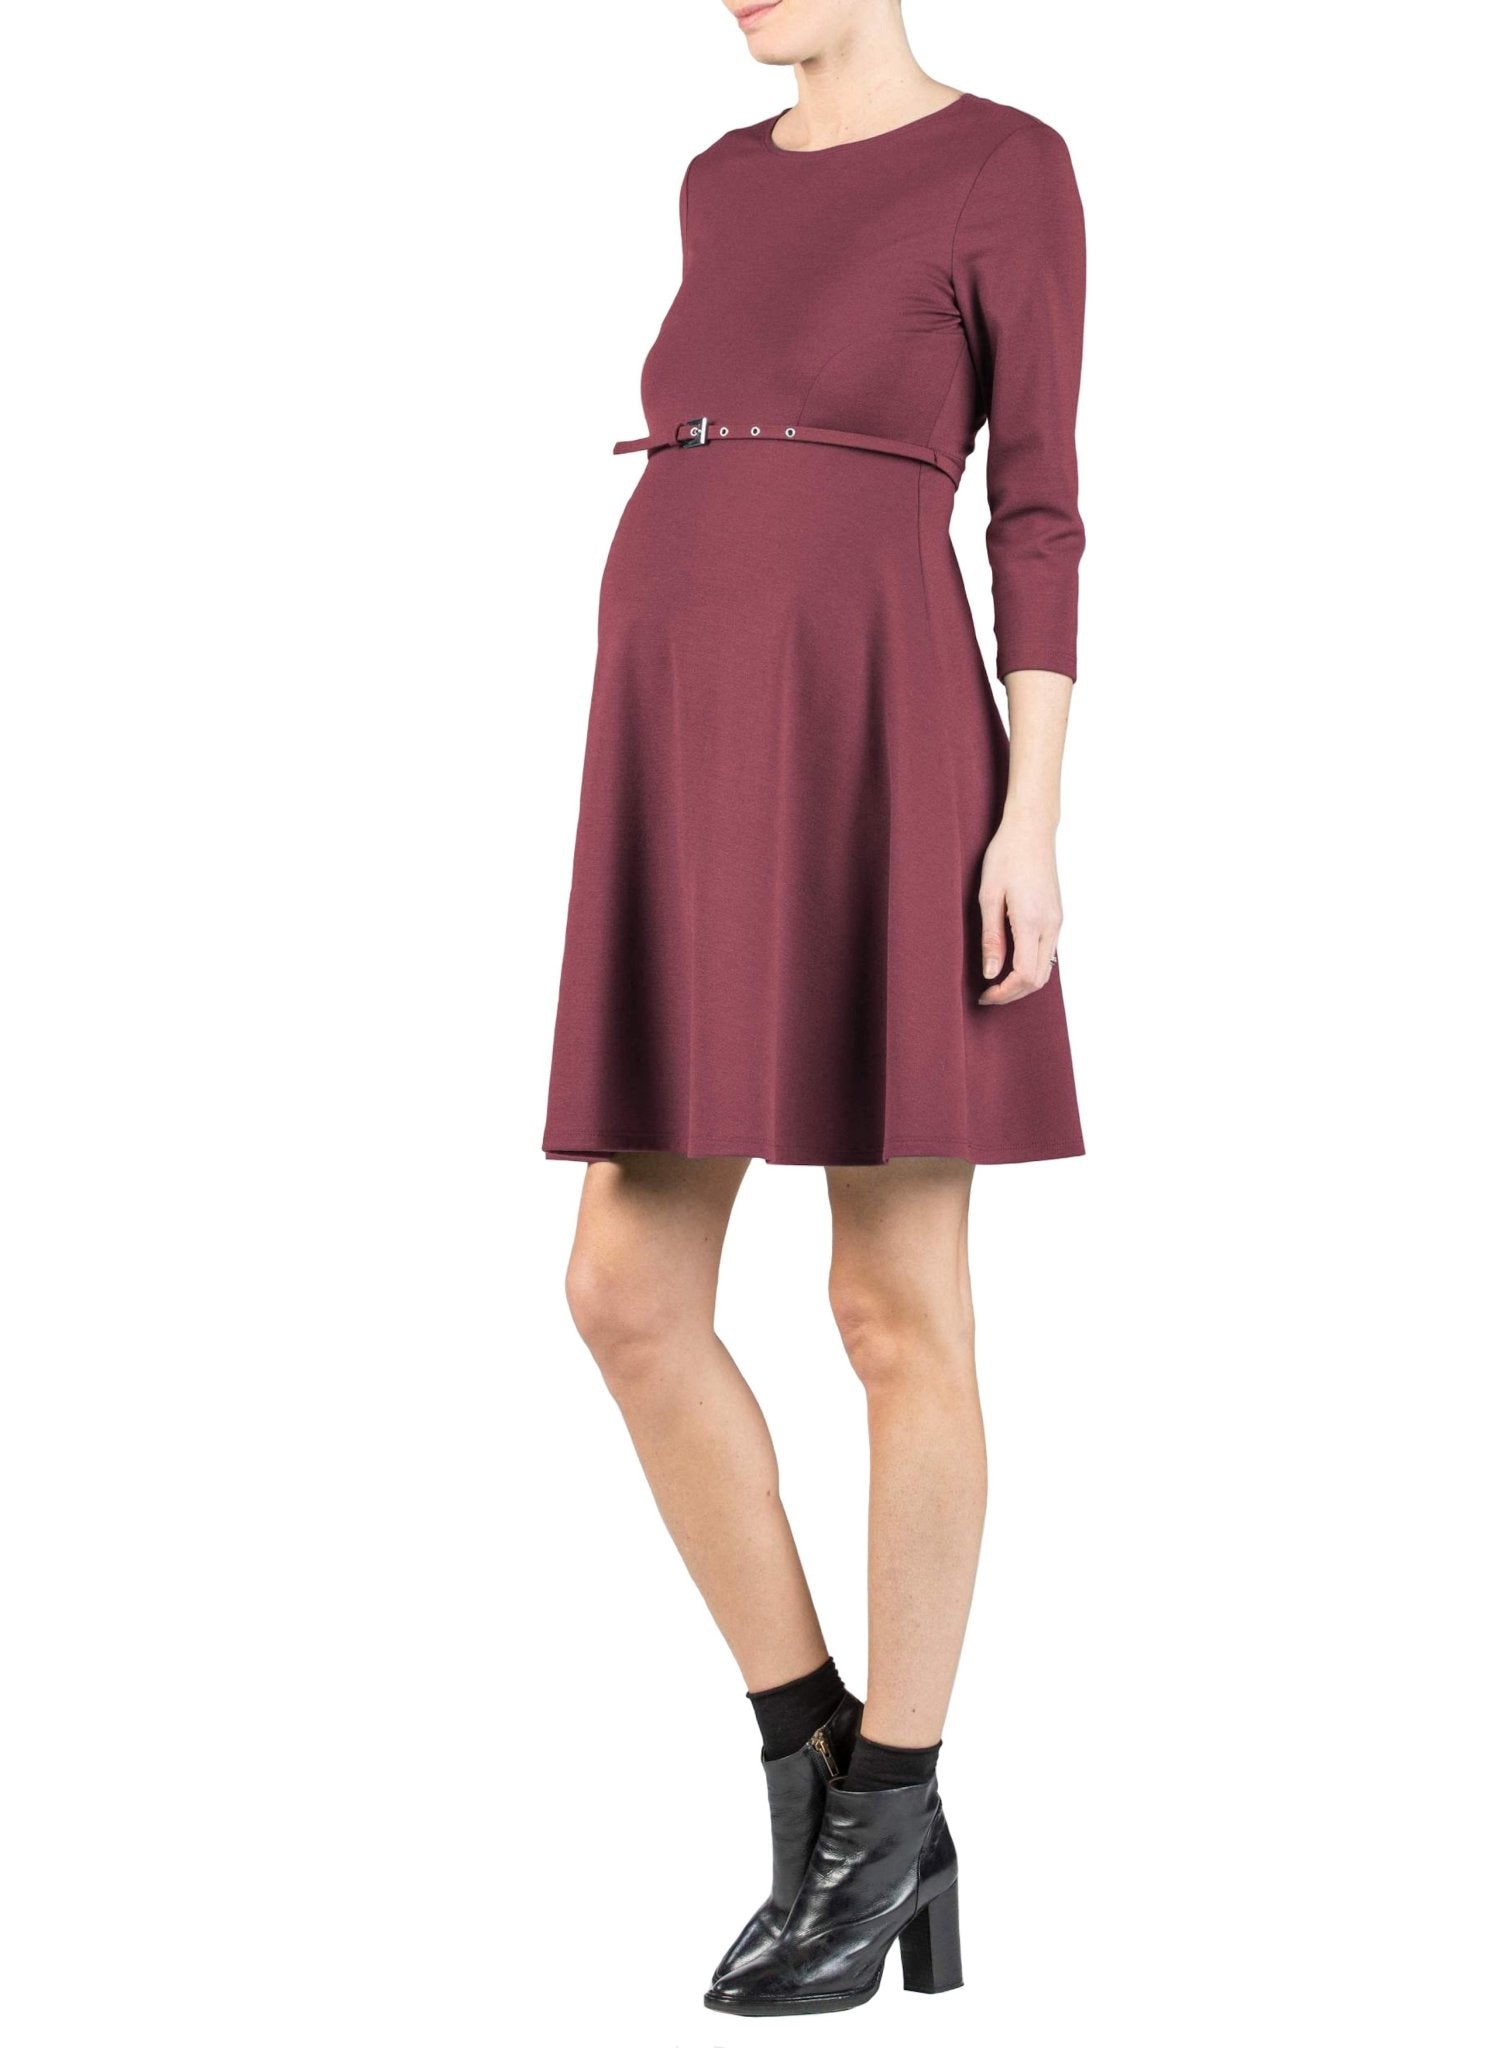 Flared Maternity Dress with Belt - Bordeaux - Mums and Bumps